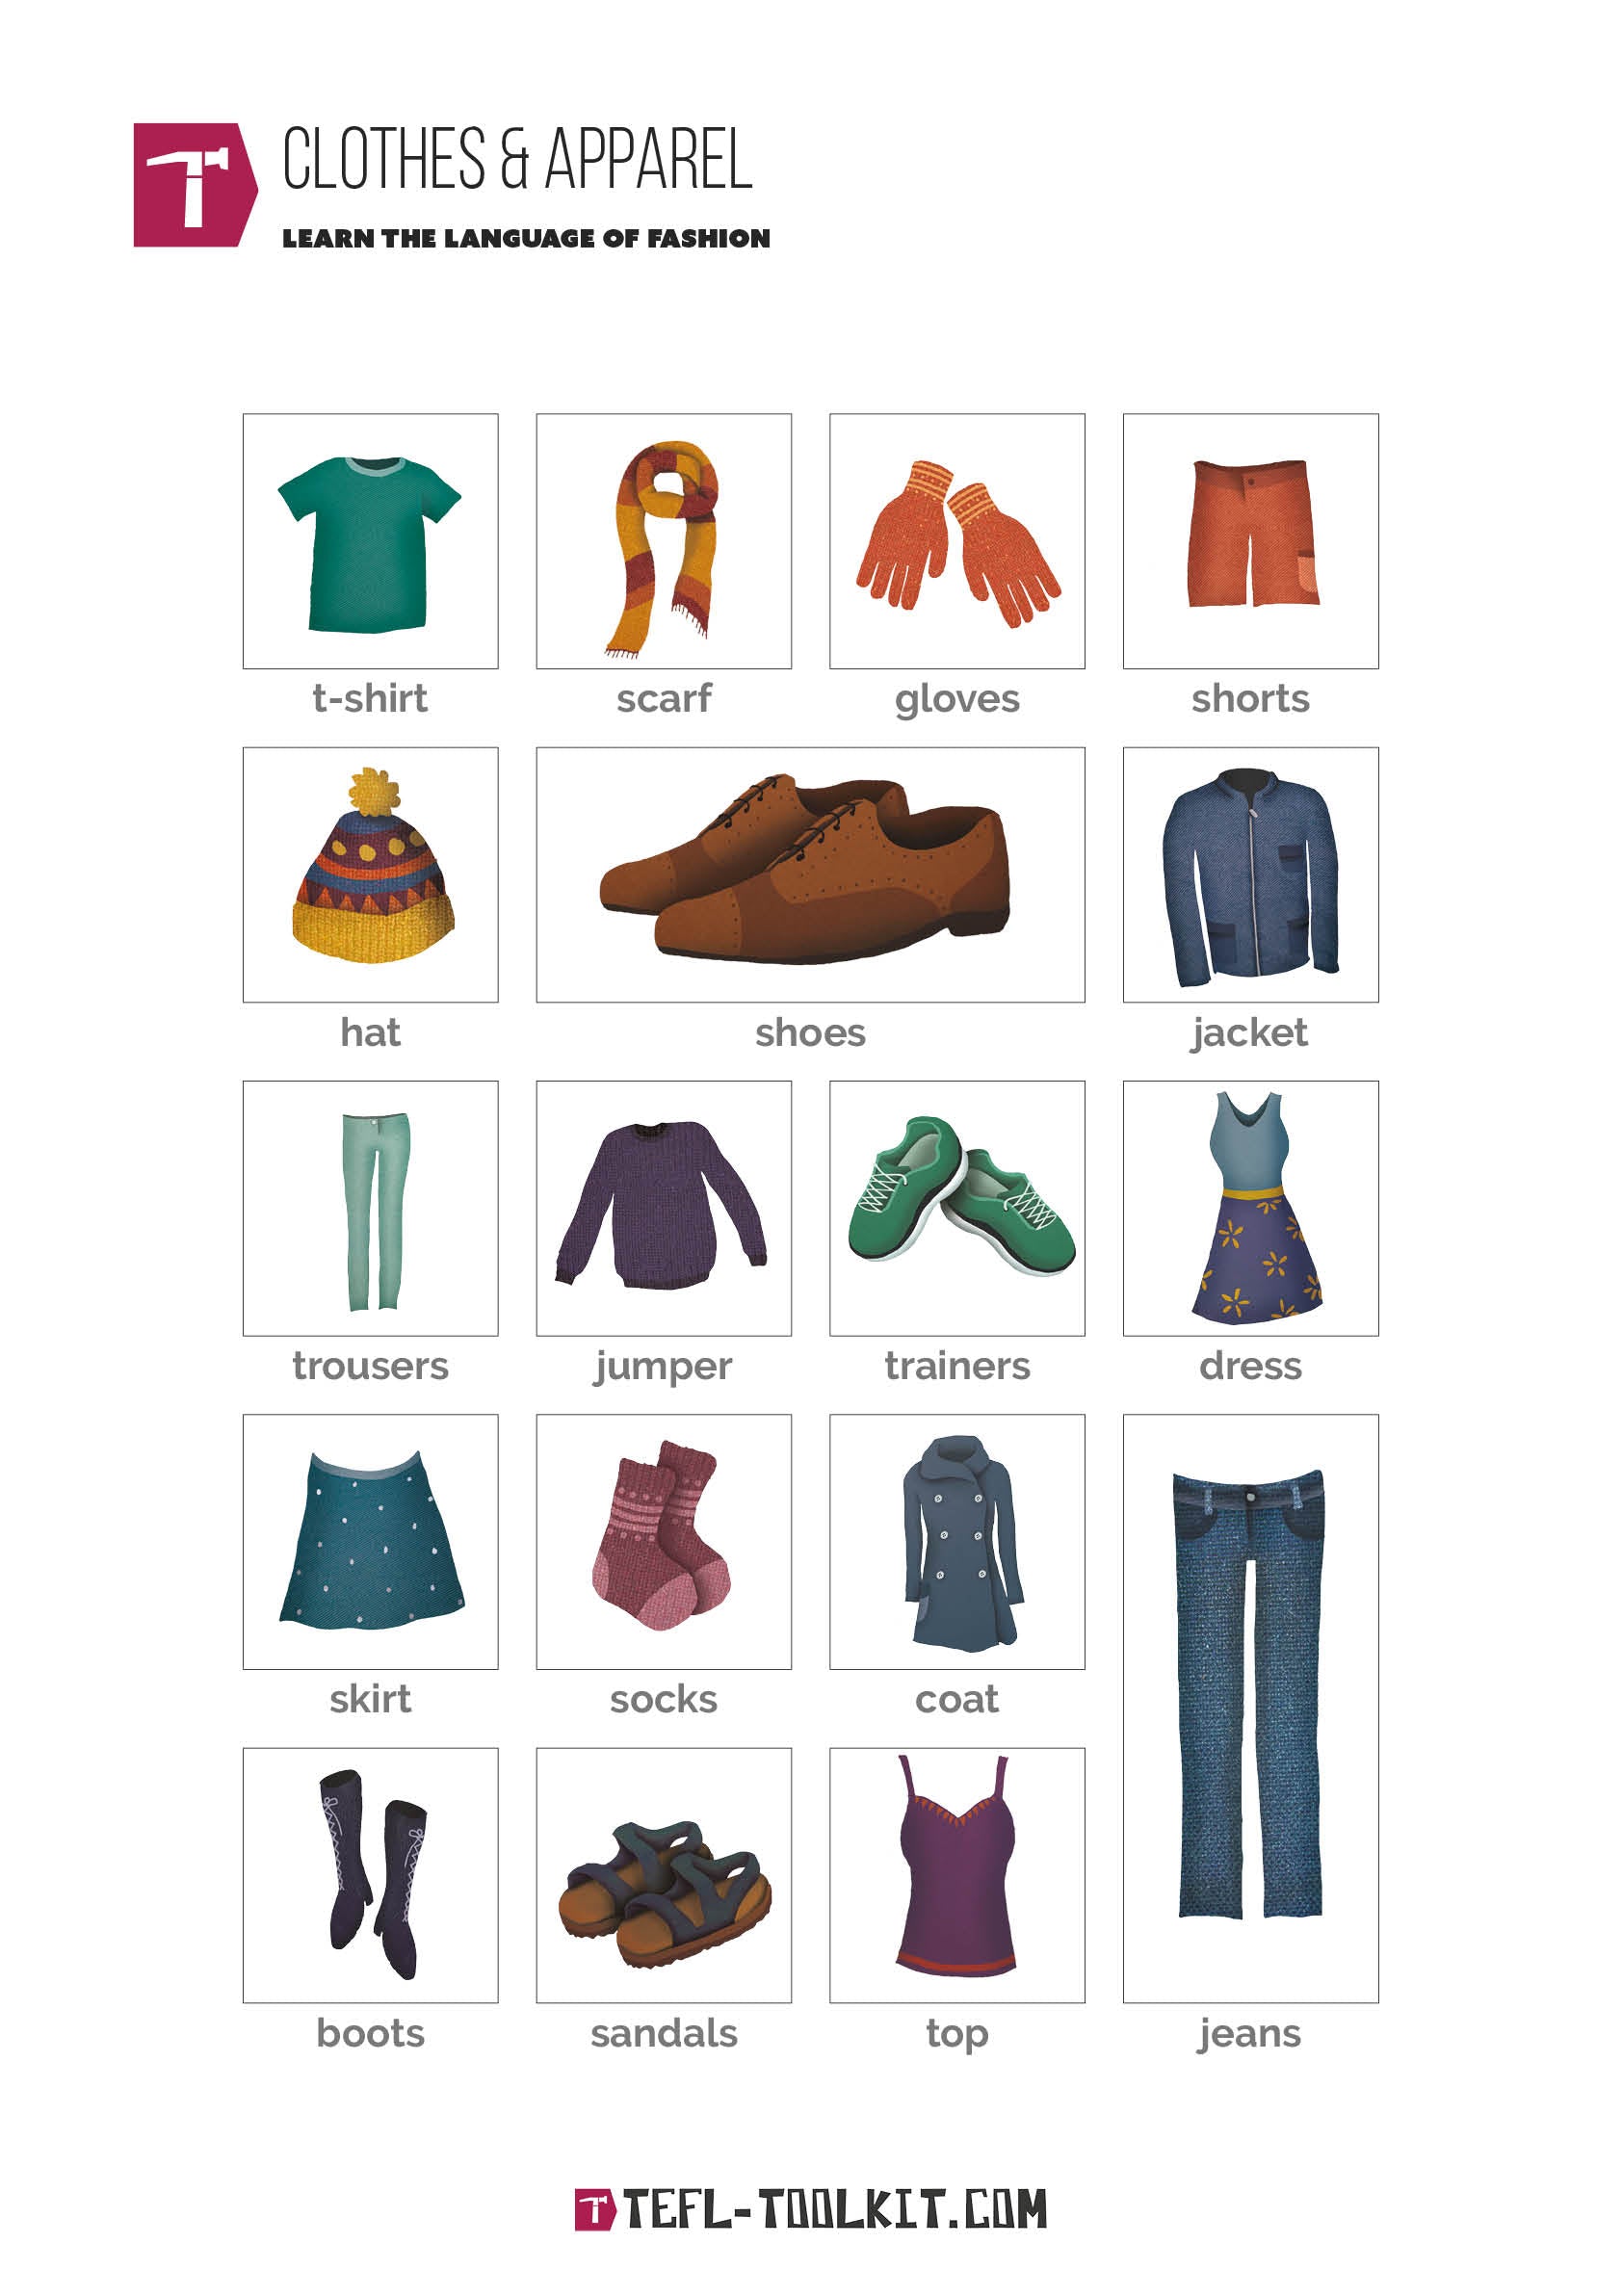 Clothes and Apparel | Virtual Worksheet and Poster - TEFL-Toolkit.com